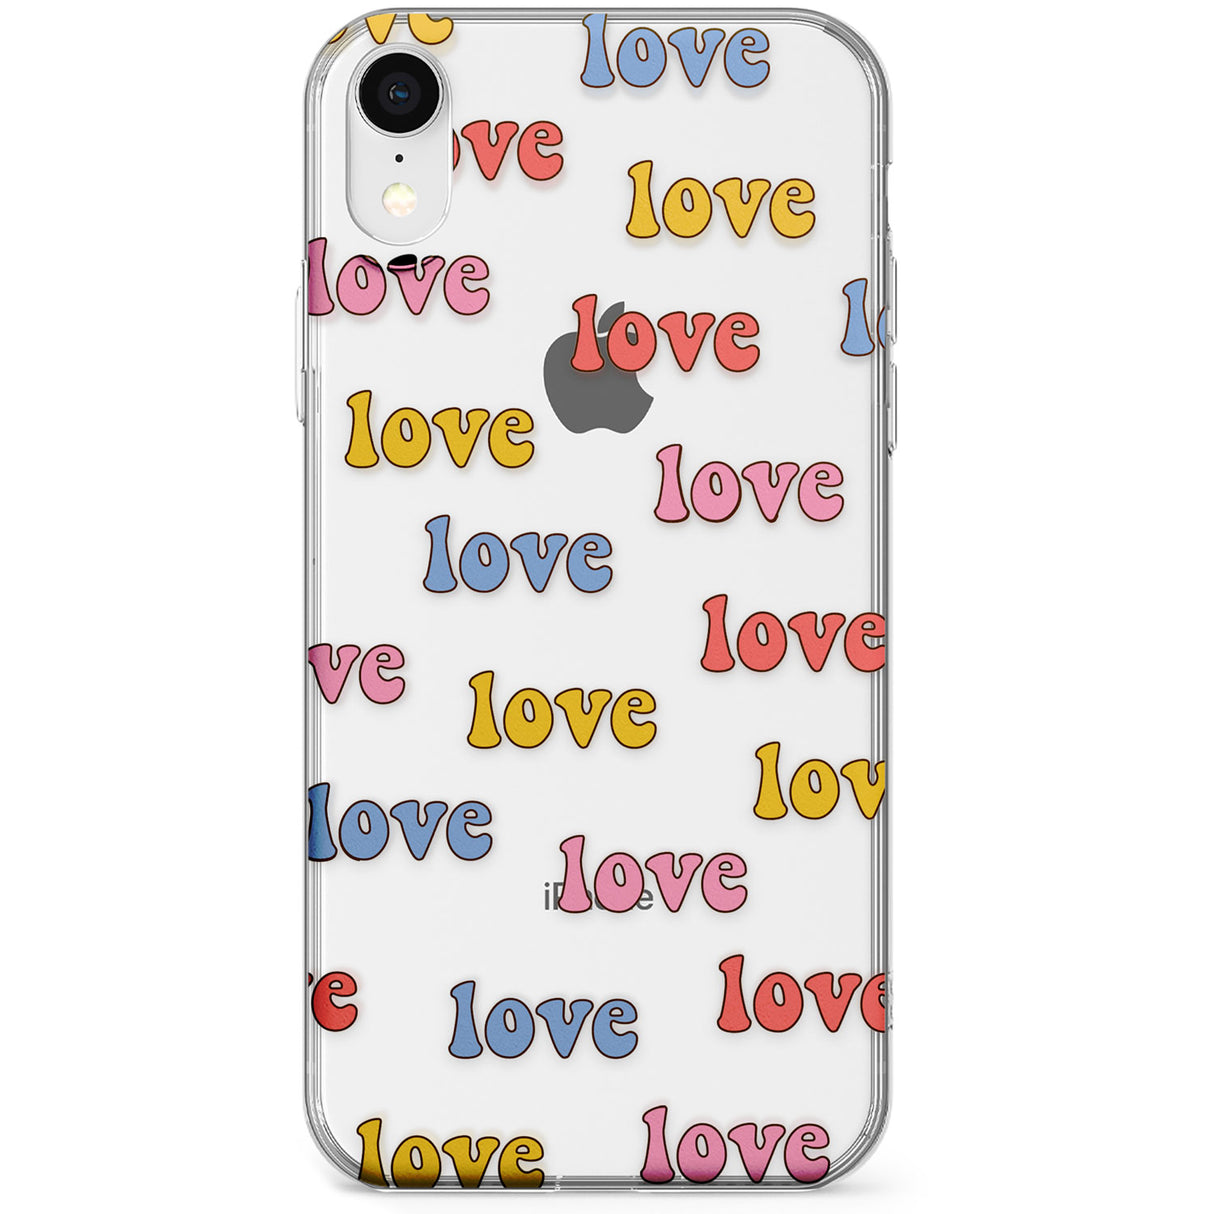 Love Pattern Phone Case for iPhone X, XS Max, XR